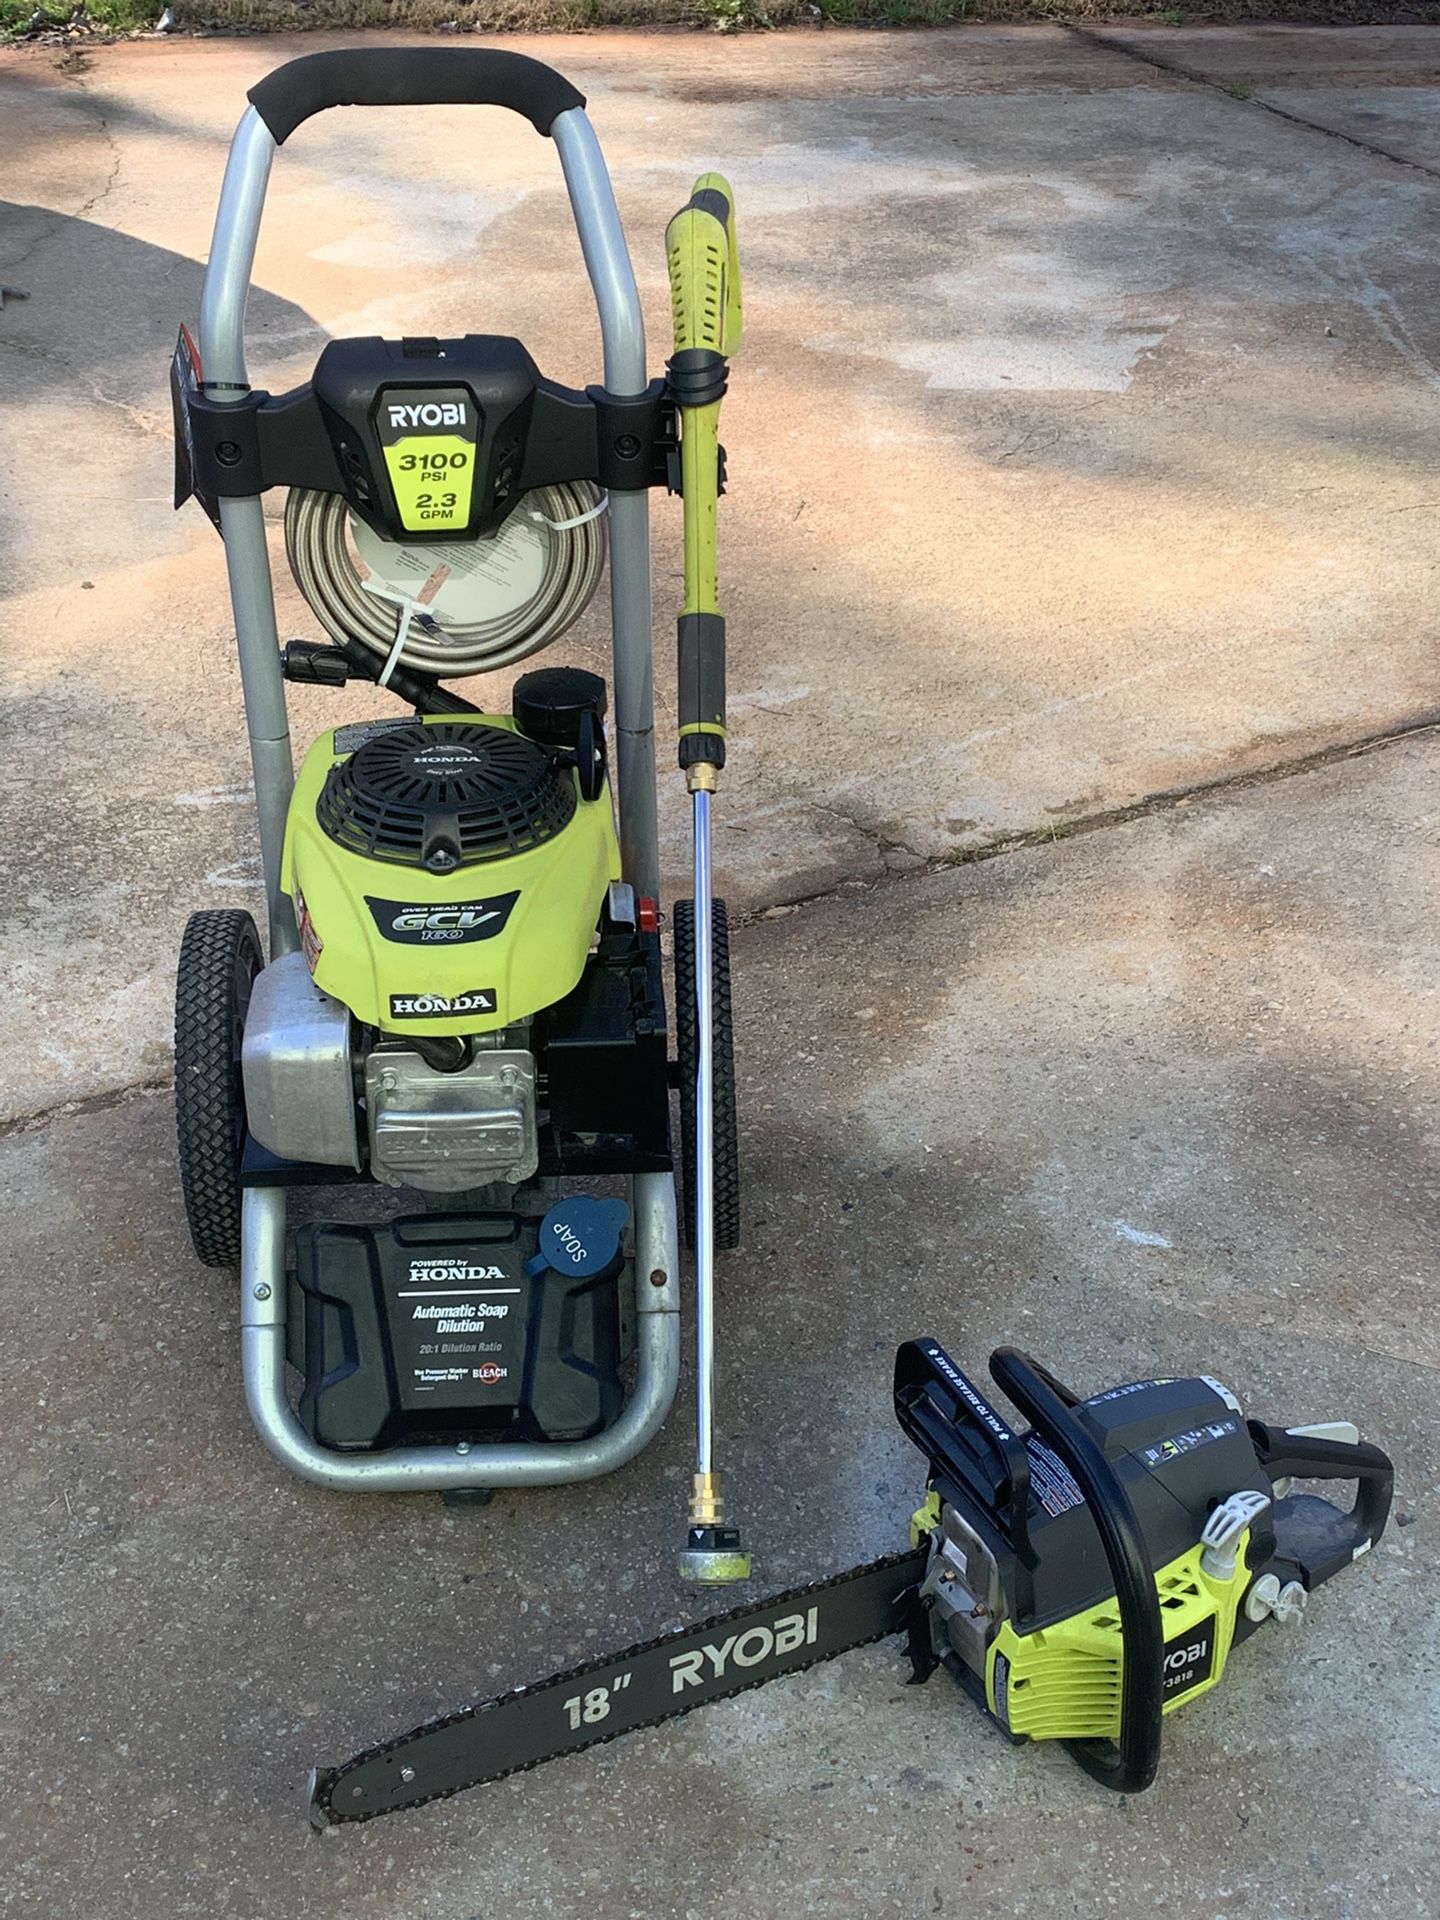 Pressure Washer And Chainsaw